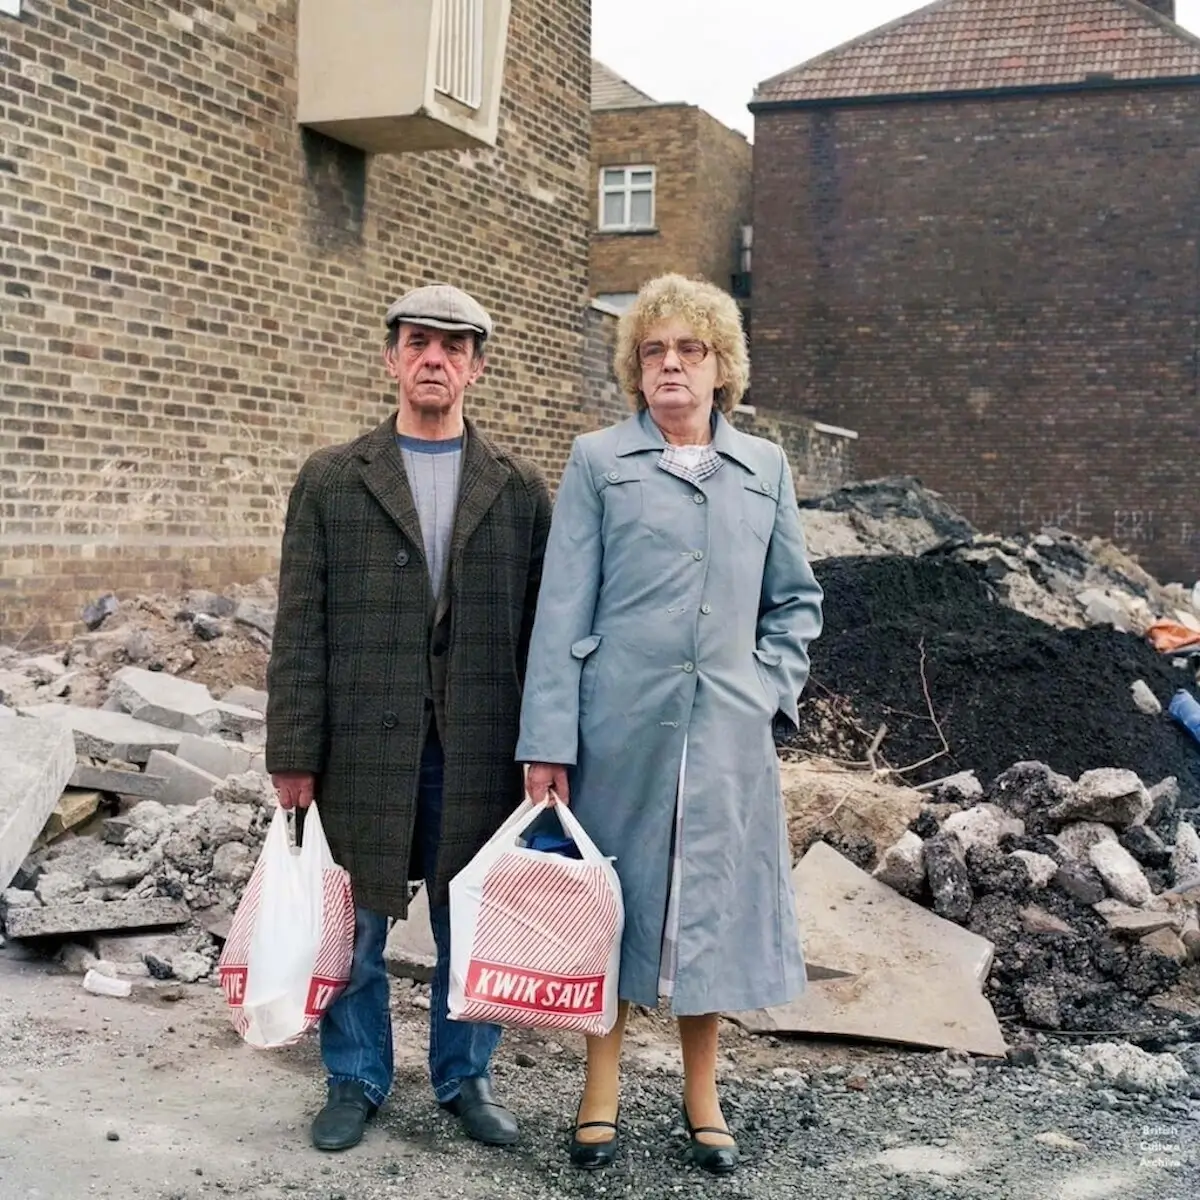 Johnny and Pat, Vauxhall, 1987 by Rob Bremner.